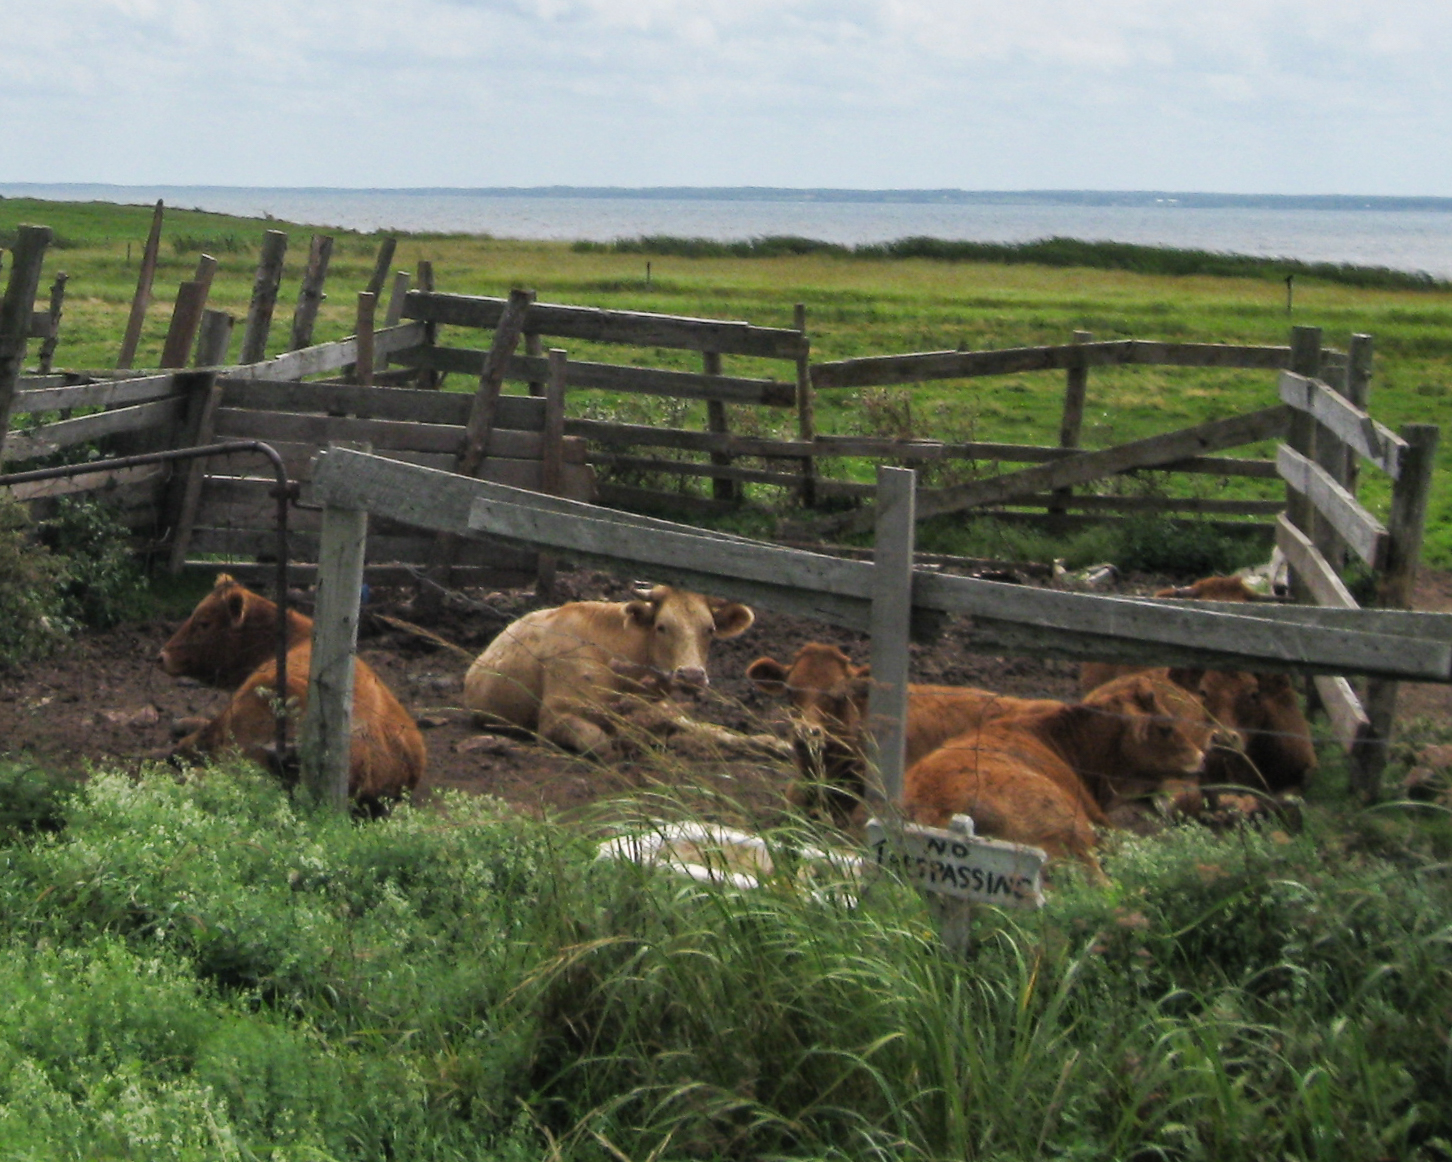 cows in a pen by the sea